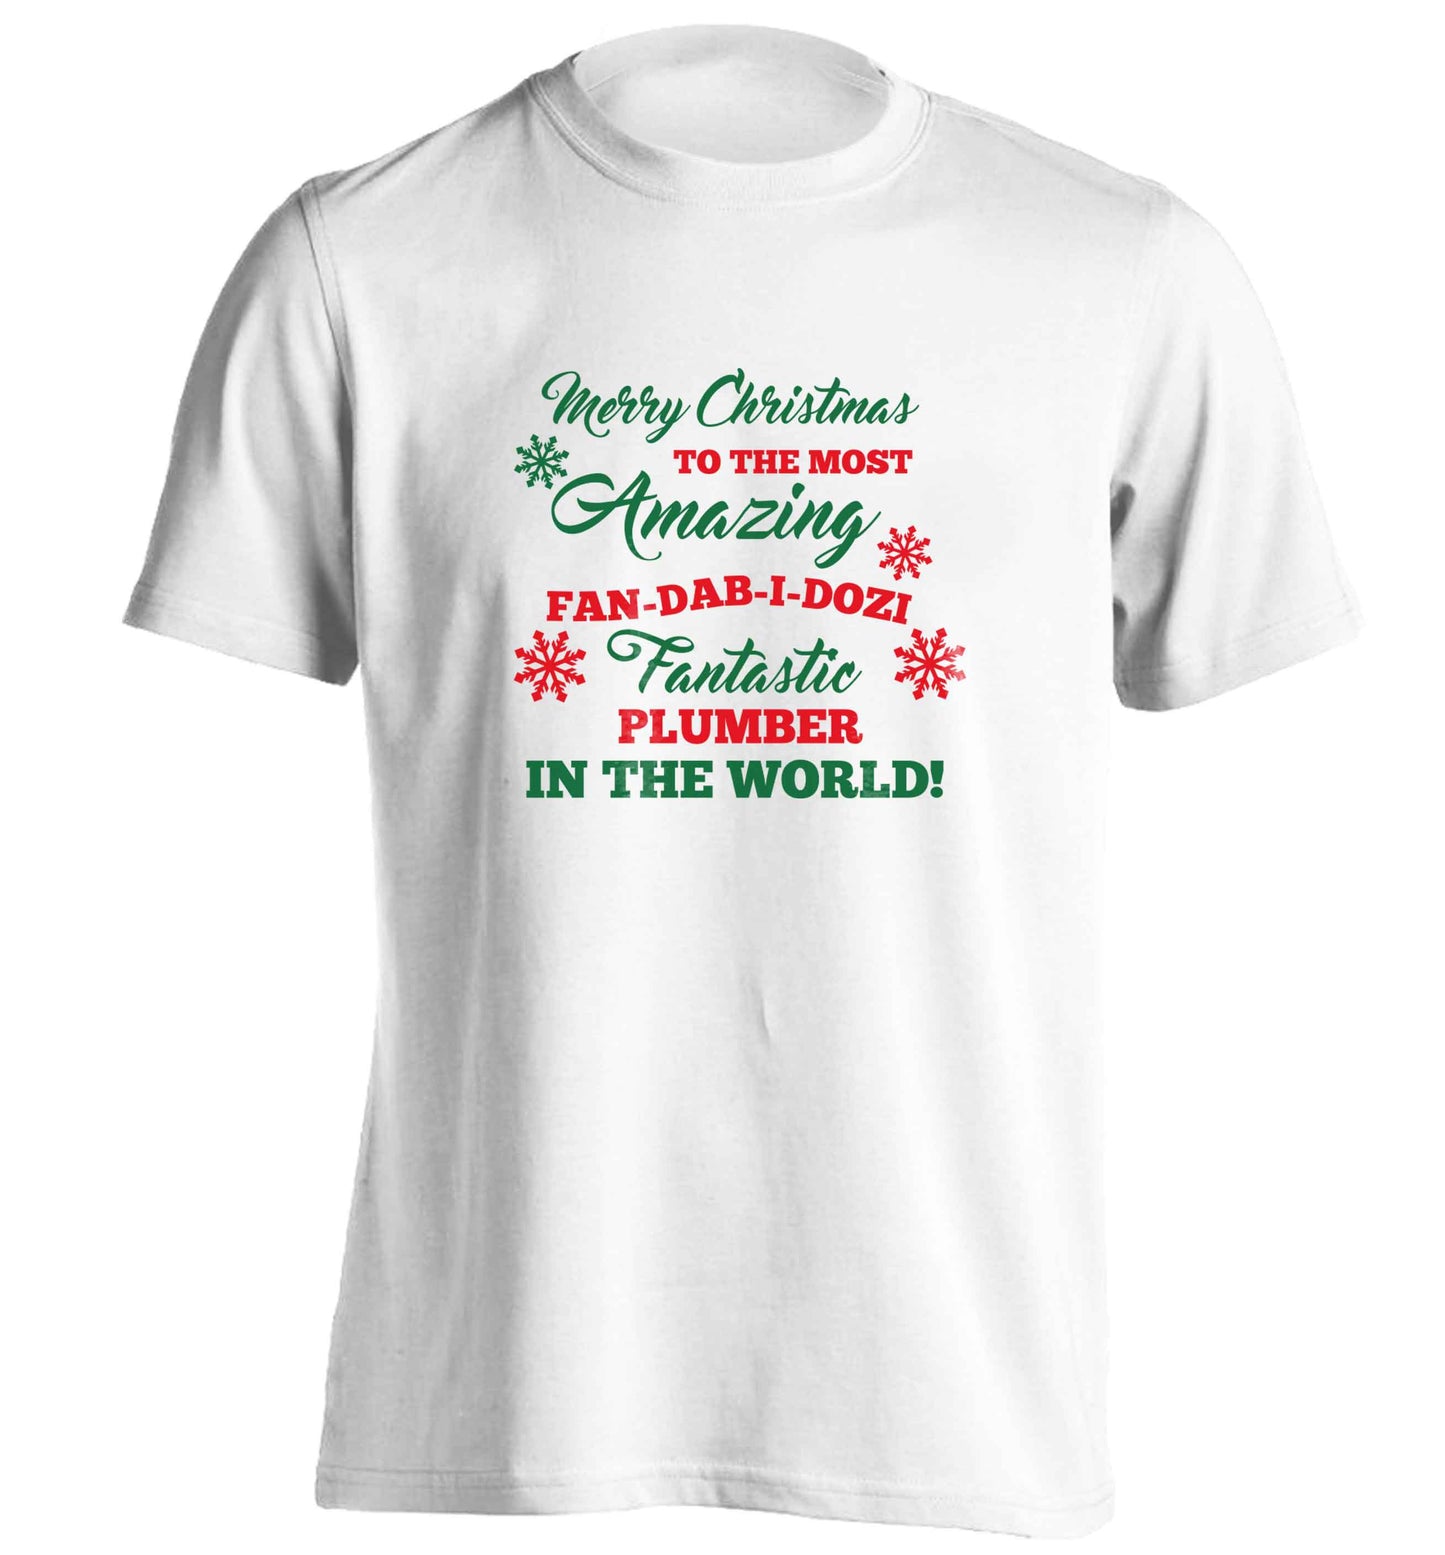 Merry Christmas to the most amazing plumber in the world! adults unisex white Tshirt 2XL